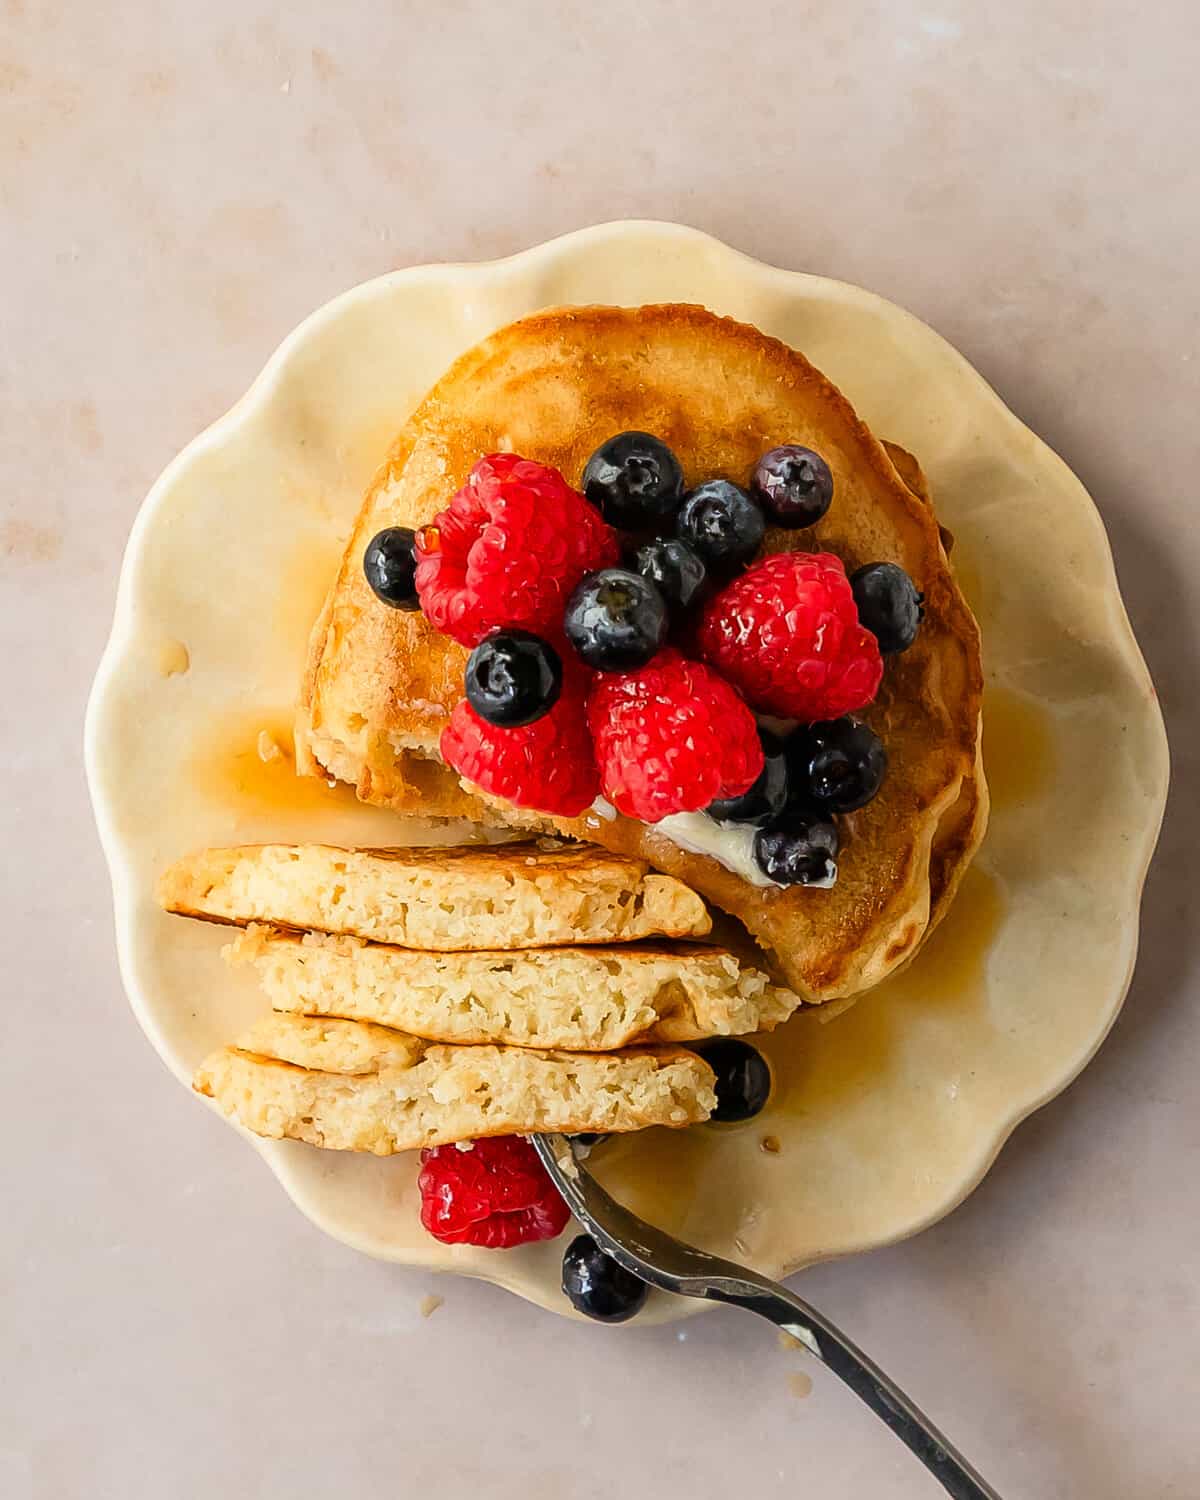 Learn how to make these quick and easy no milk pancakes using simple pantry ingredients and water as a substitute for milk. A stack of these from scratch pancakes makes the perfect cozy breakfast everyone will love, even if you don’t have milk. 